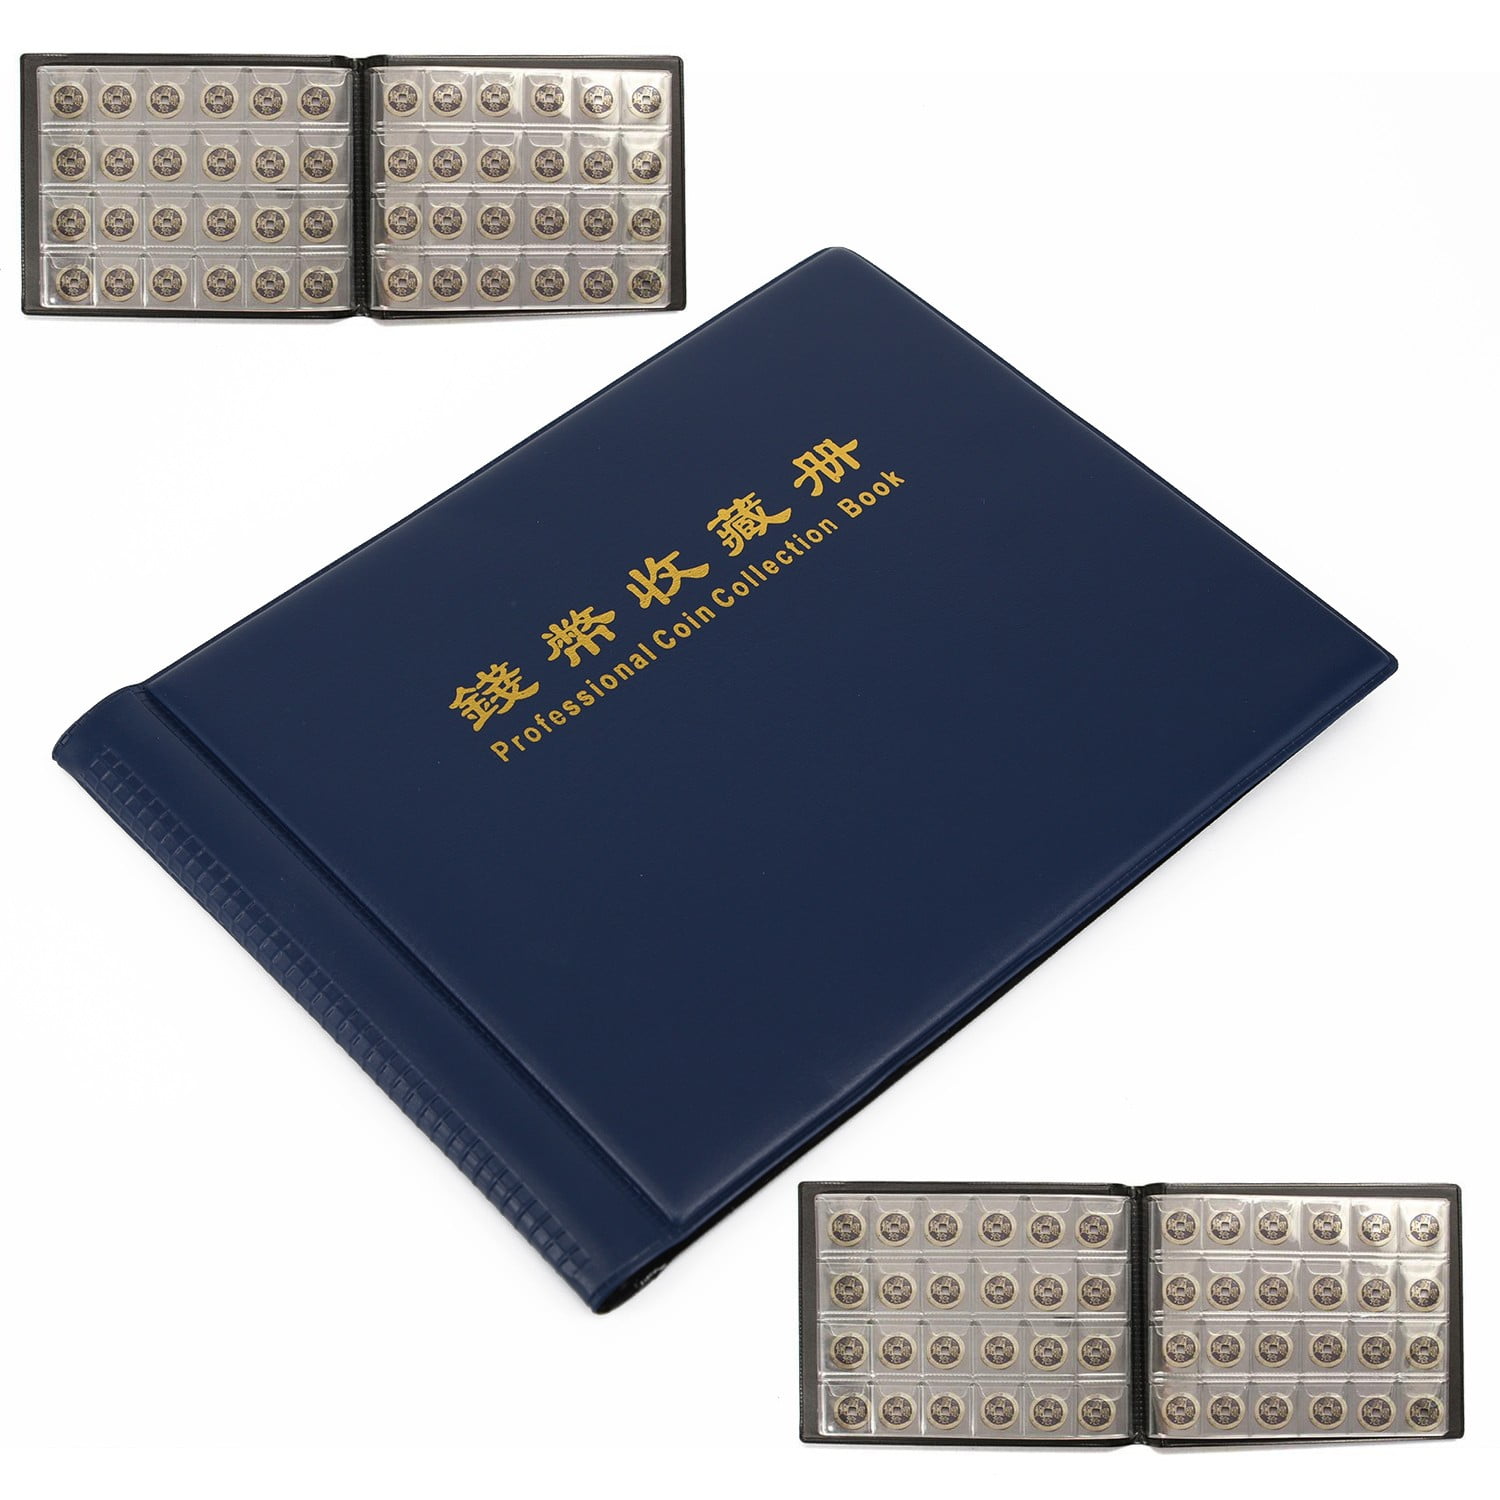 New Coin Paper money Note Holder Page Binder Empty Album Not Include Pages Black 